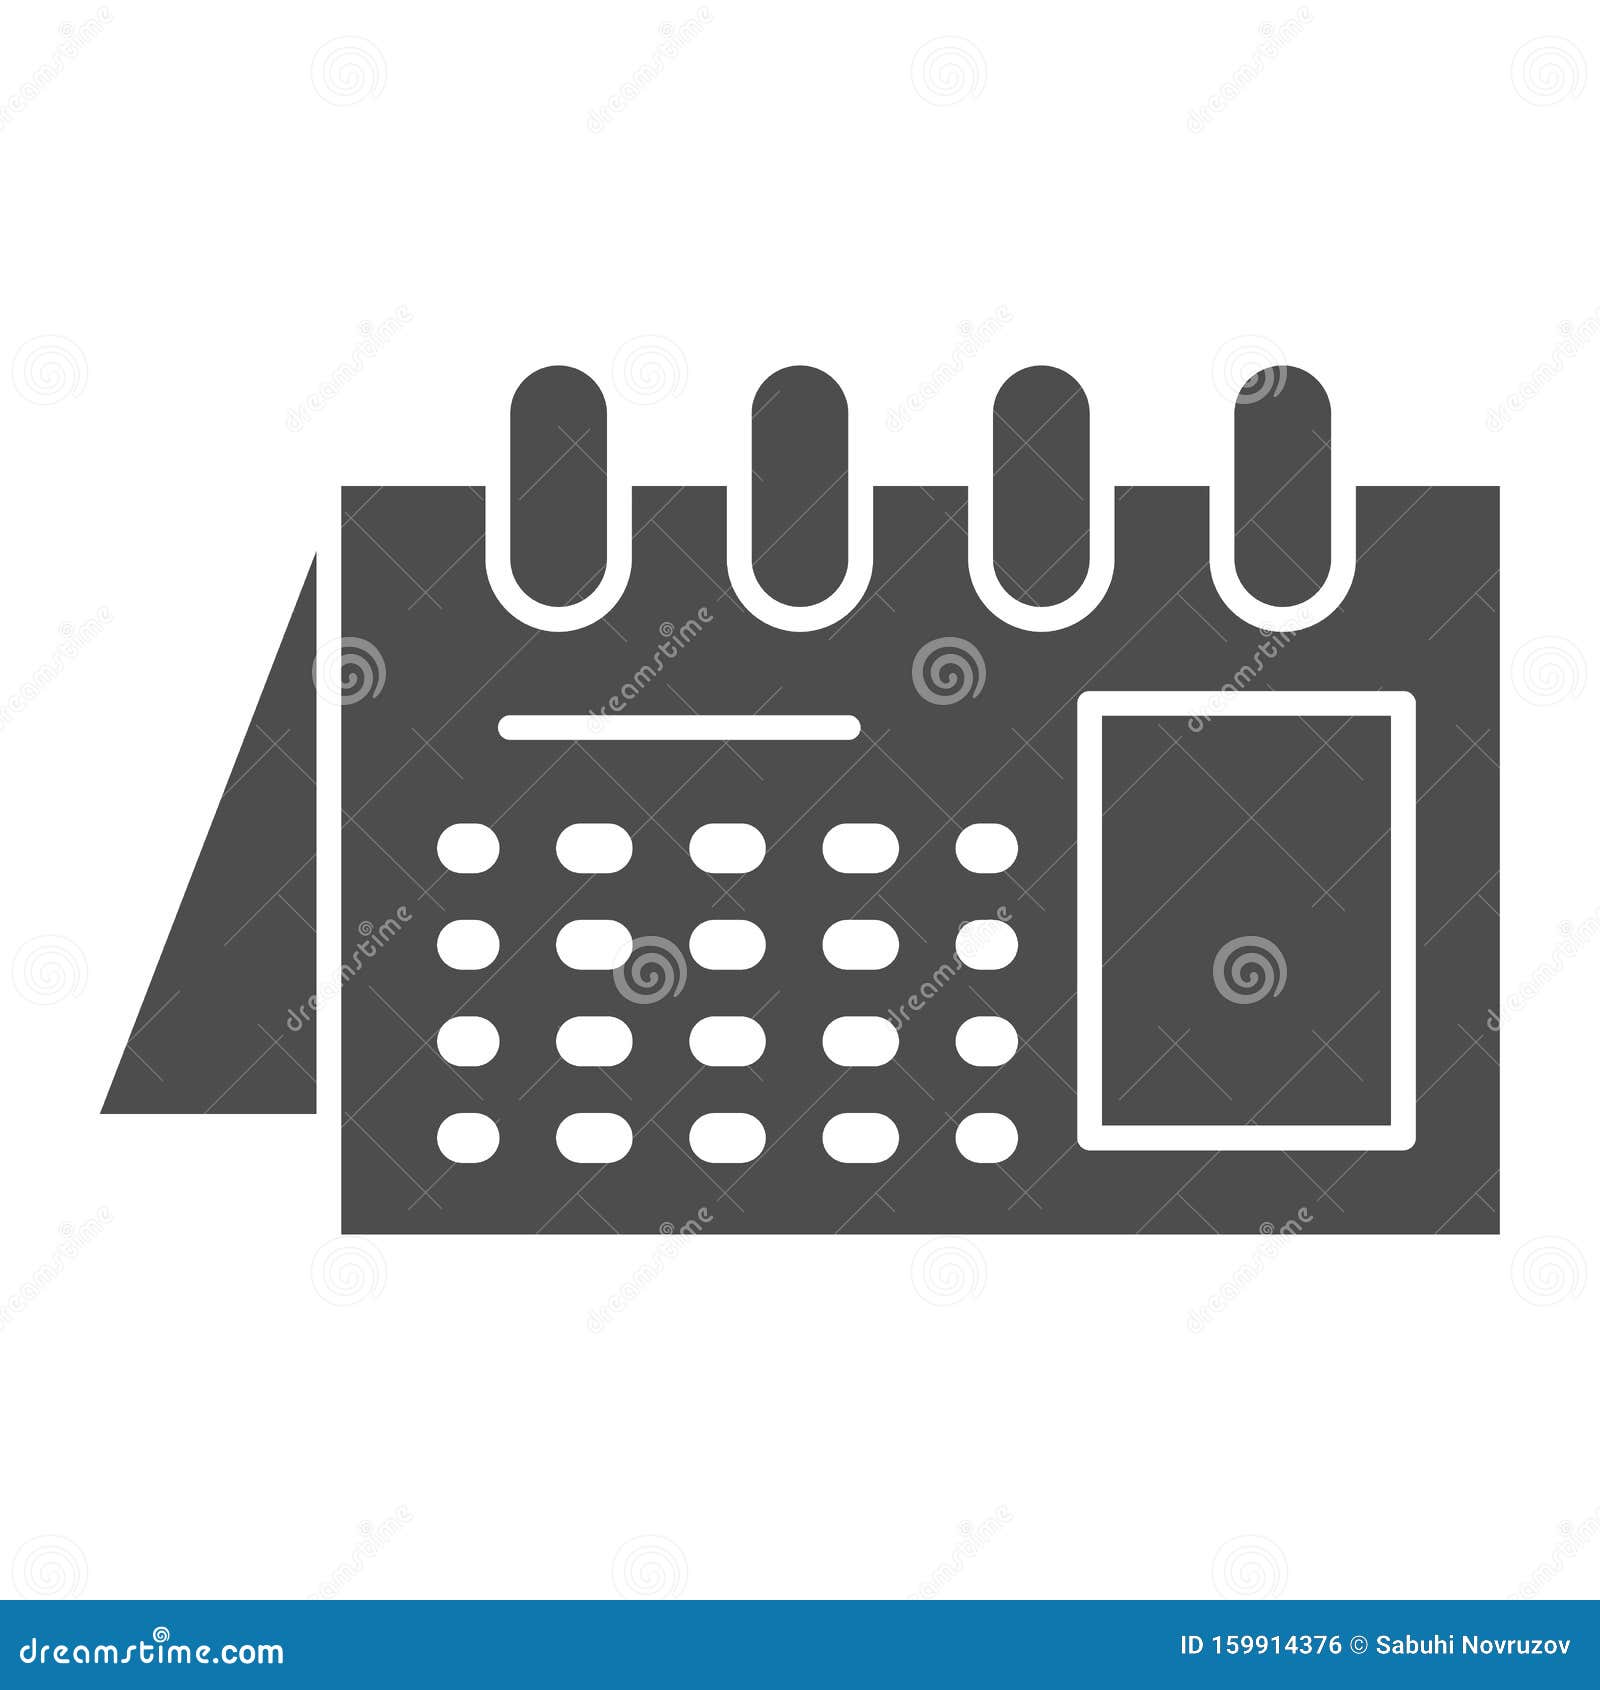 Calendar Solid Icon. Reminder on Spiral Vector Illustration Isolated on